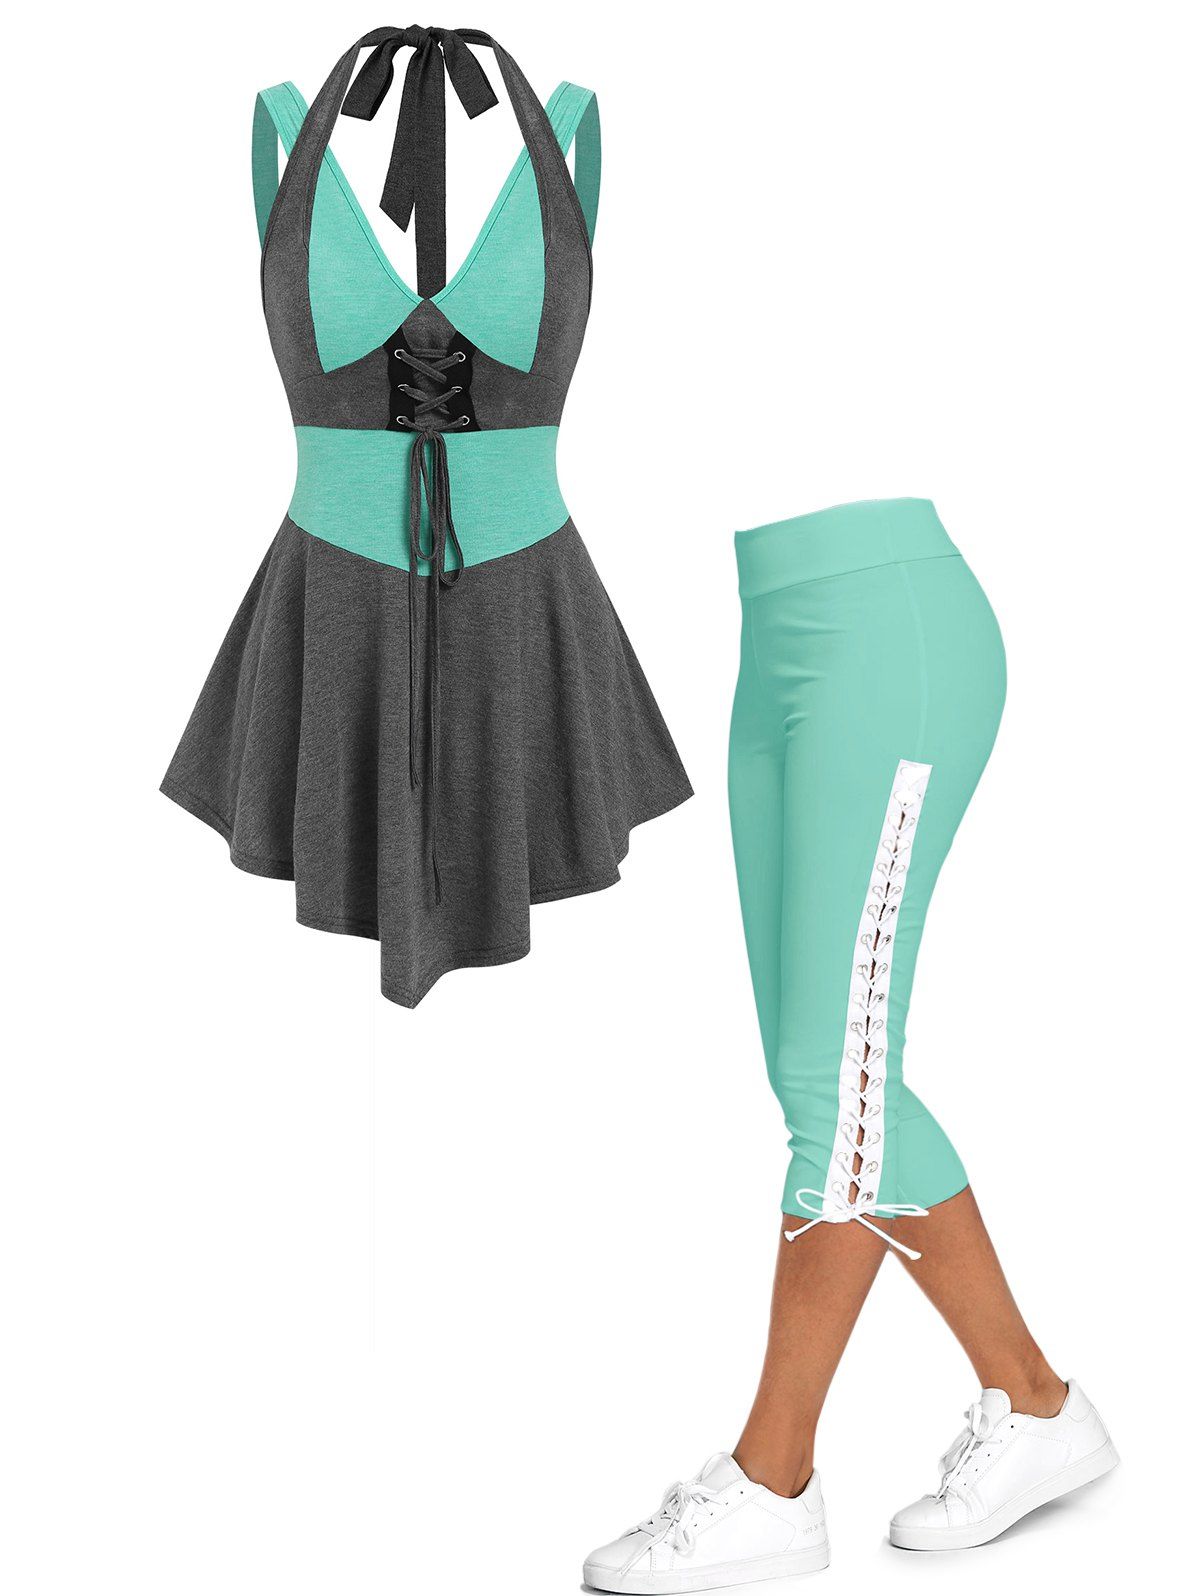 Contrast Colorblock Tie Back Skirted Heathered Tank Top and Plain Color Lace Up Skinny Crop Leggings Casual Summer Outfit - GREEN S